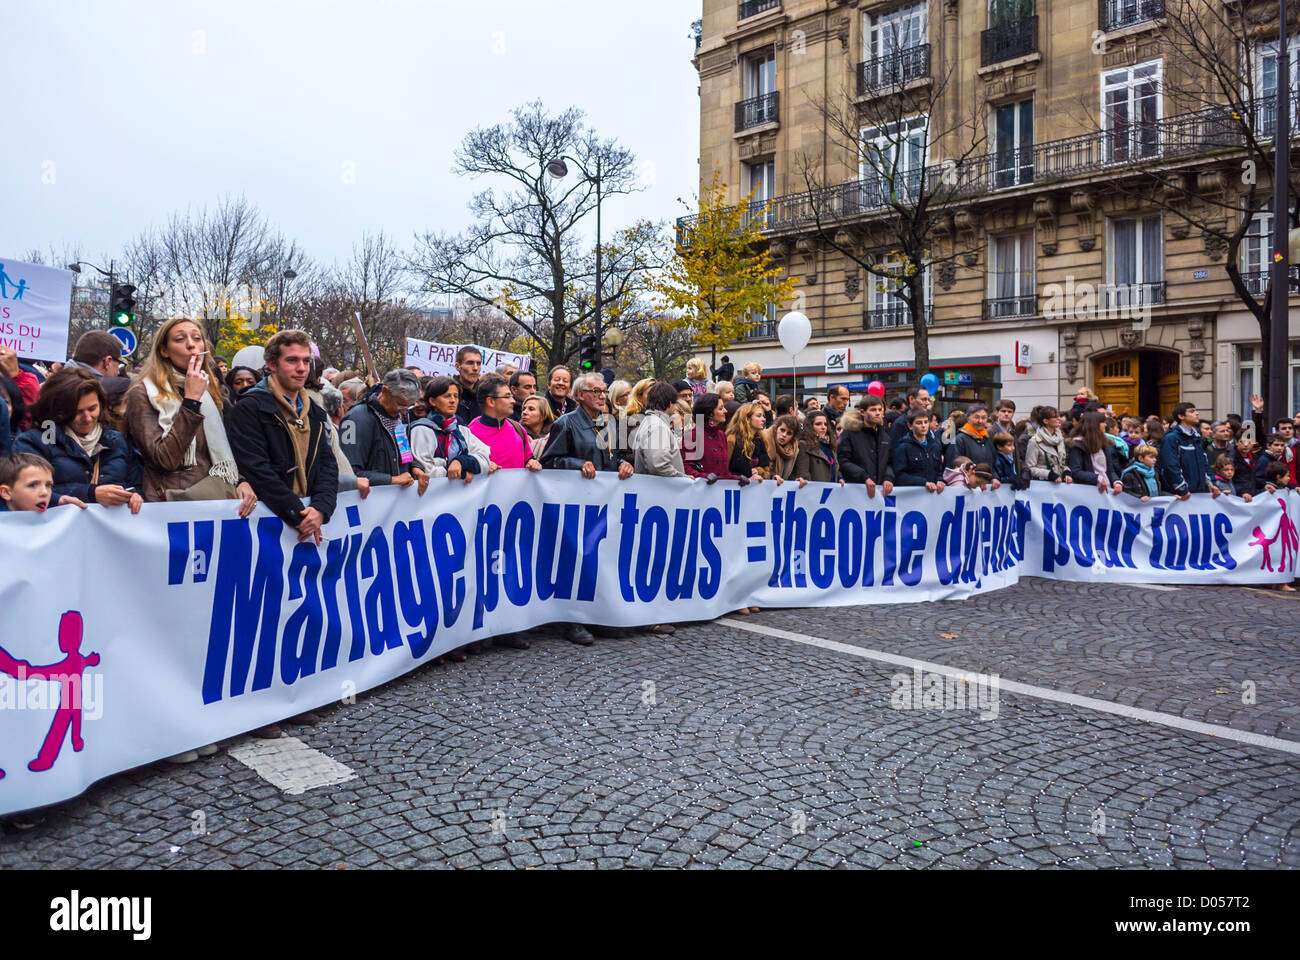 Paris, France, Crowd Seniors holding signs, at Anti-Gay Marriage Protest, by French Catholics Conservatives, people marching on street, conservative protesters holding banner Stock Photo